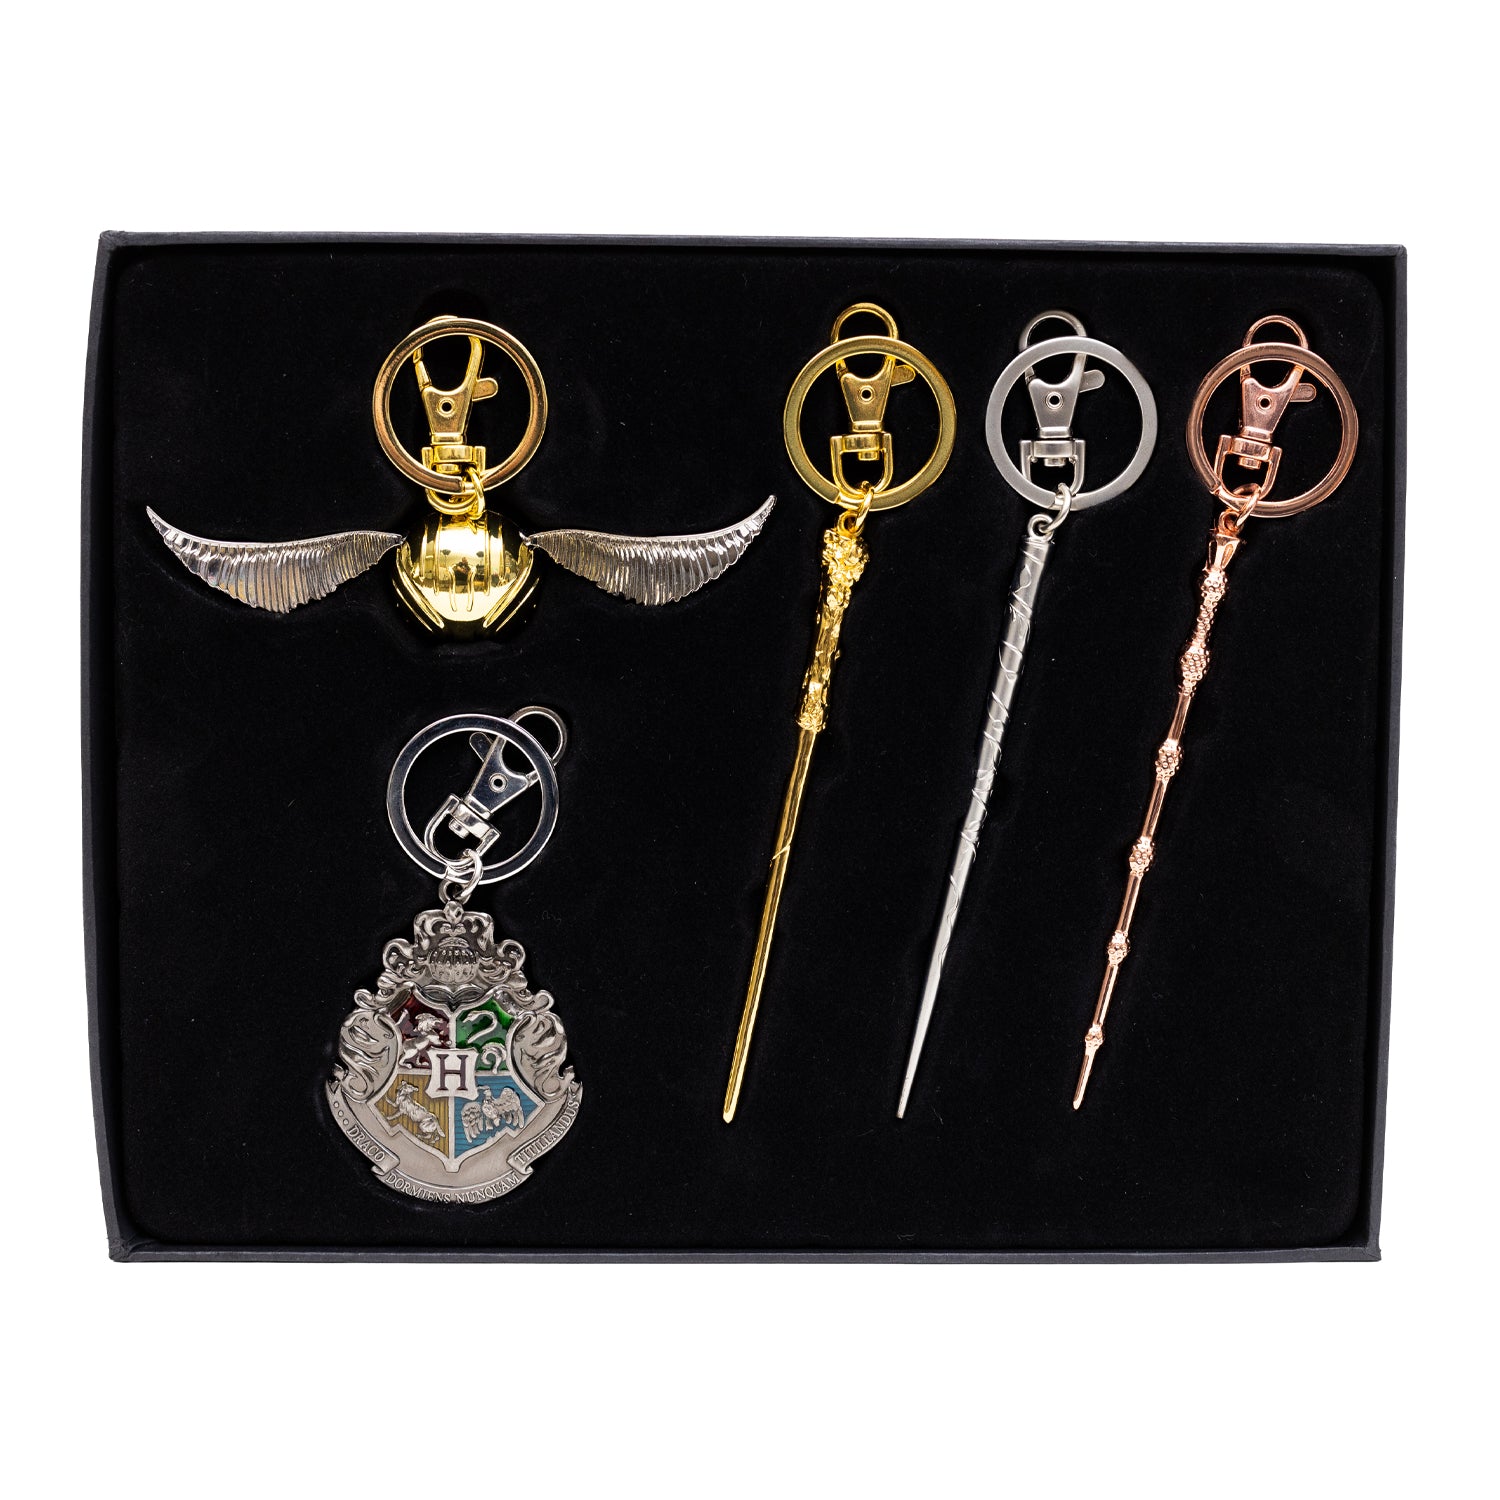 Harry Potter 2017 San Diego Comic Con Keychain Collector Set